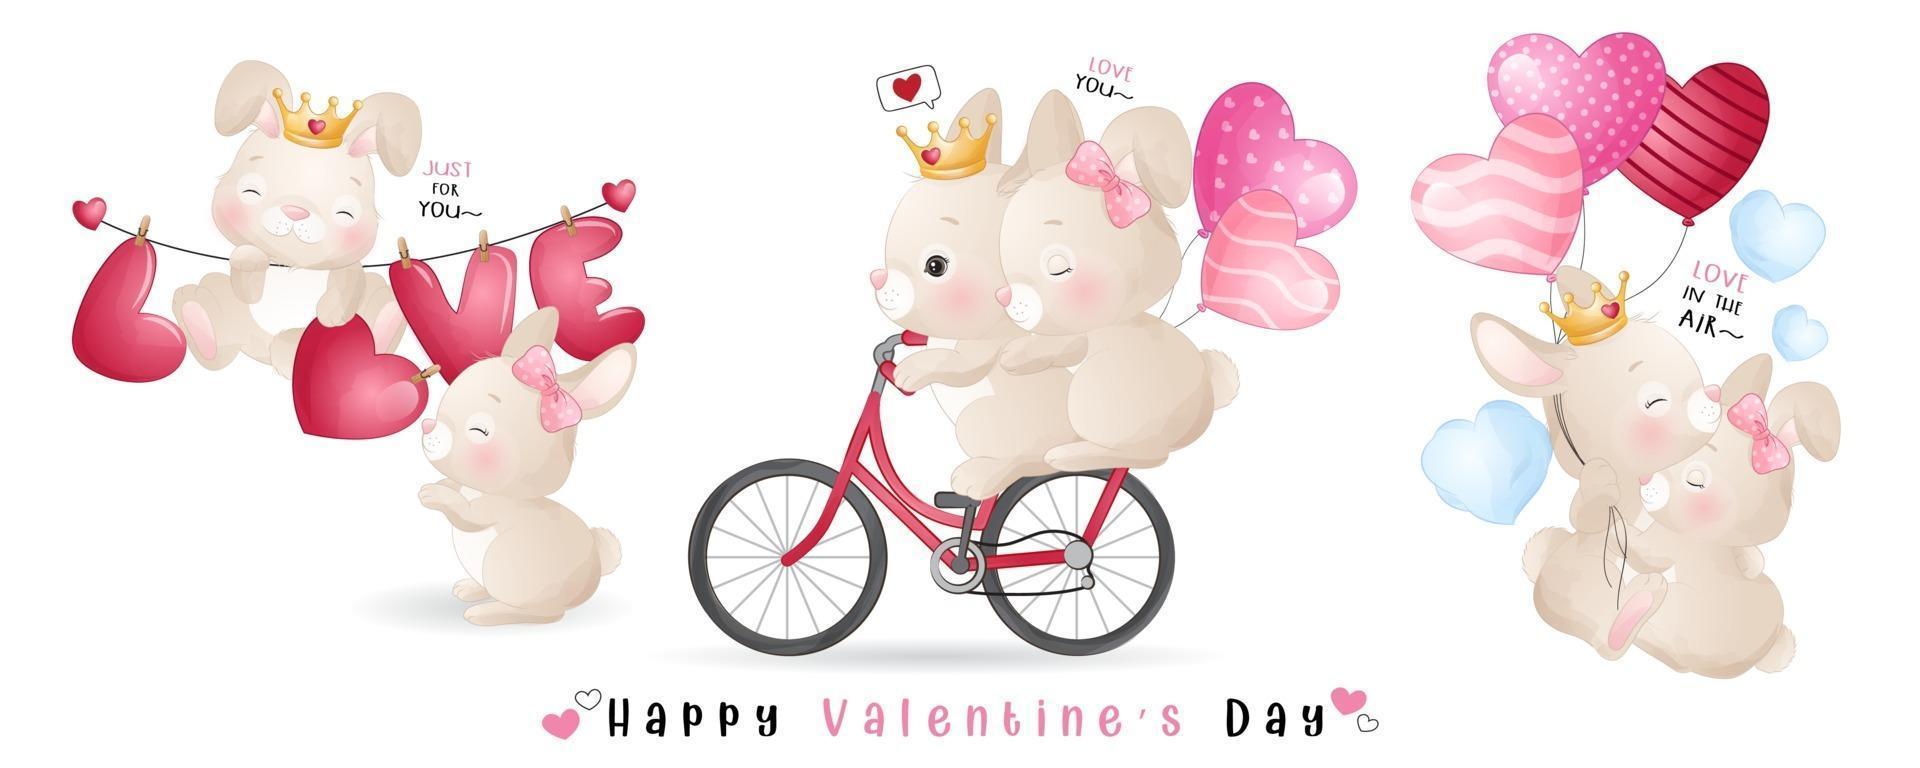 Cute doodle bunny for valentines day collection vector